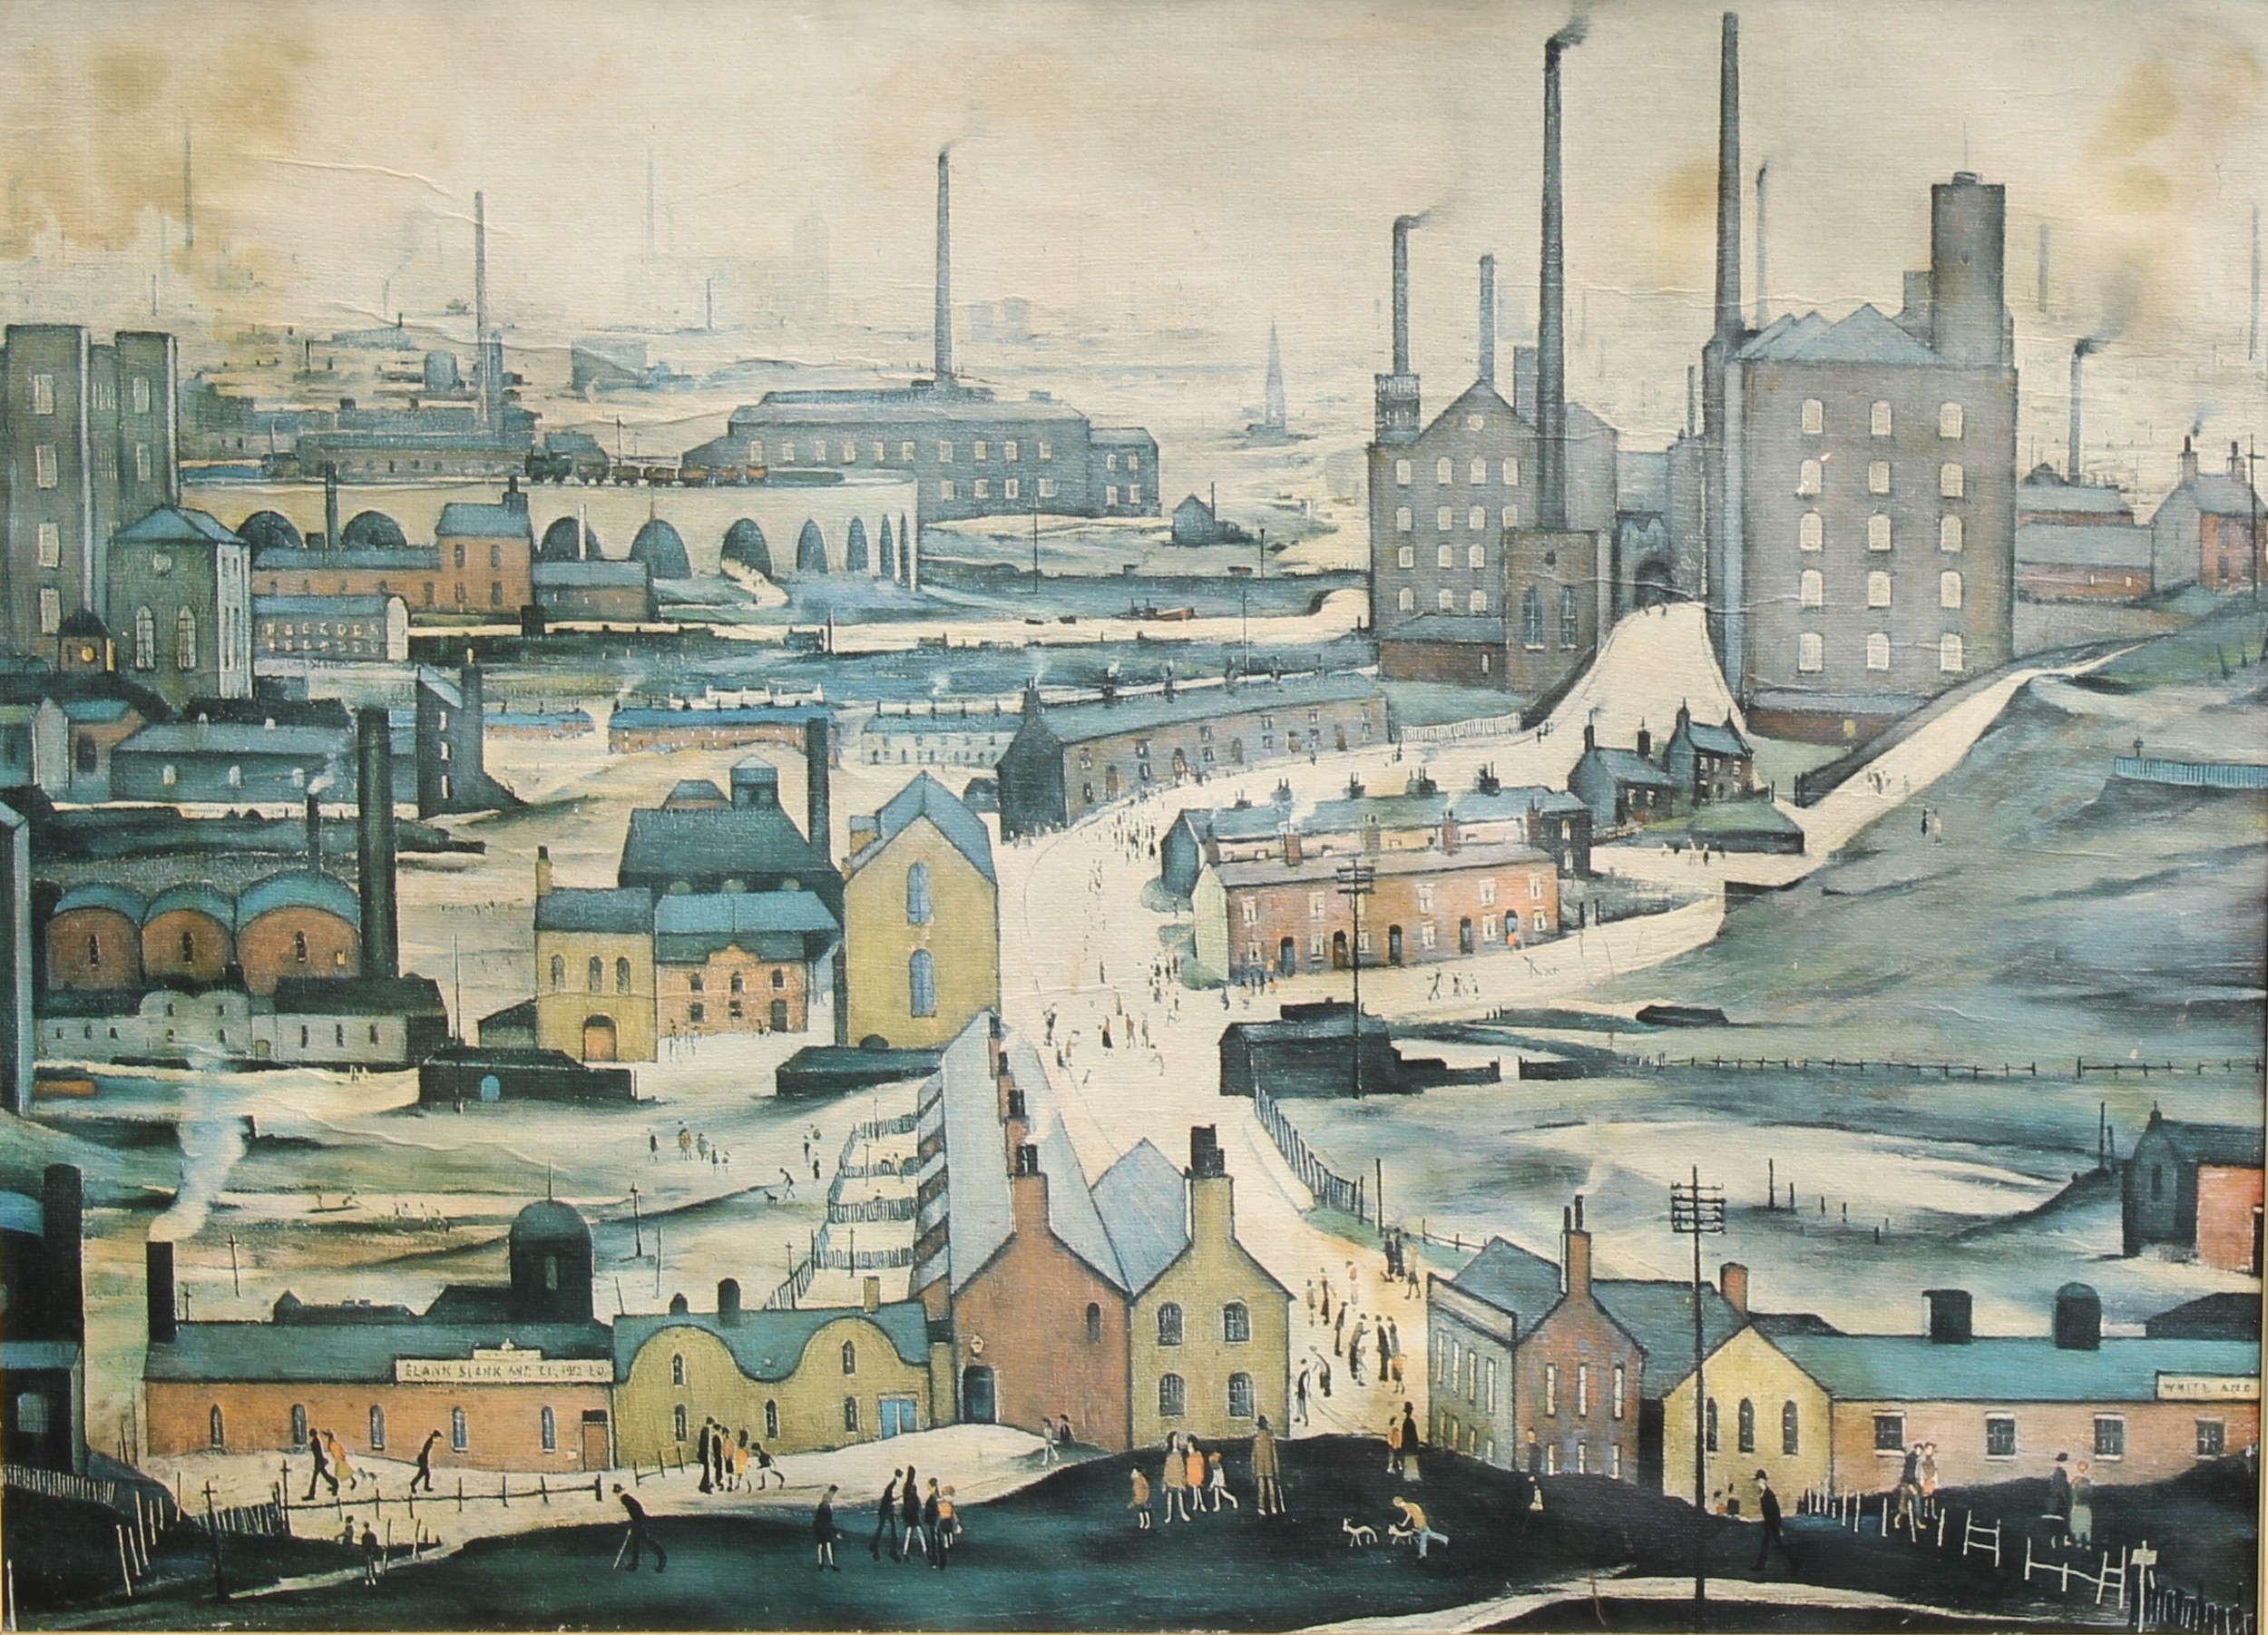 Pictures and Prints - T. Lamport, Derby '87, signed, oil on canvas, 59cm x 90cm; English School, - Image 6 of 7